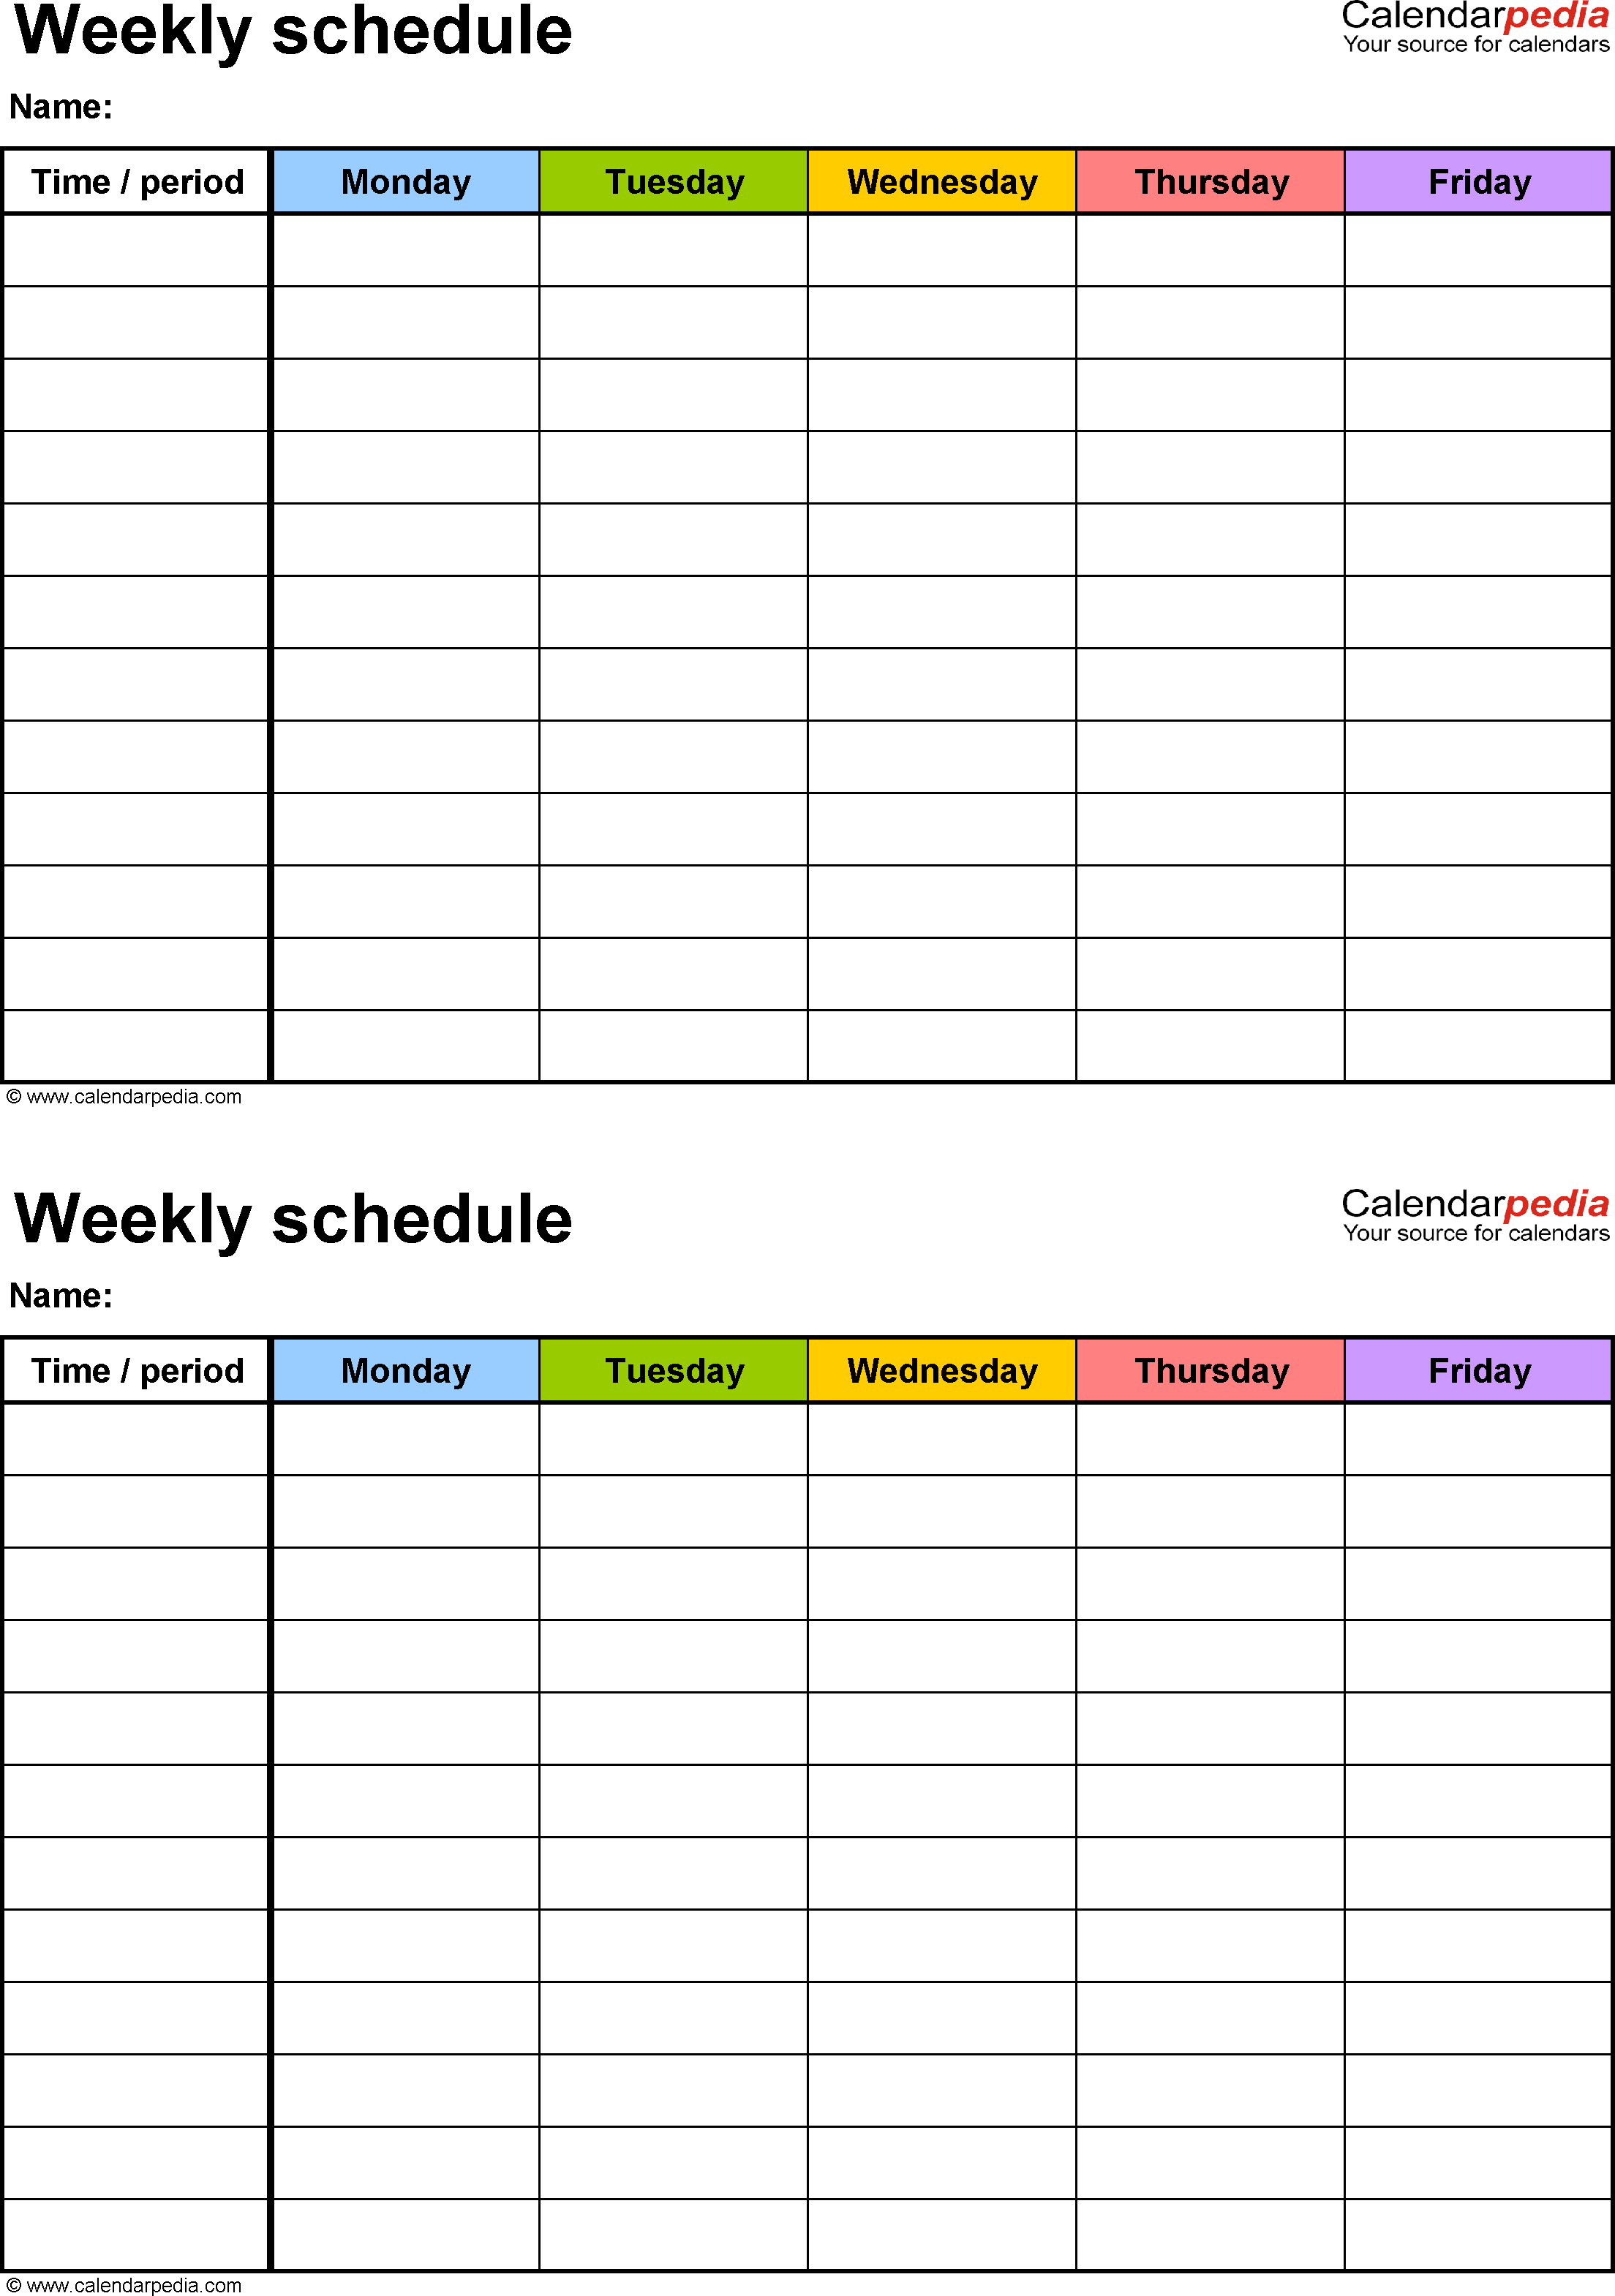 Weekly schedule template for Excel version 3: 2 schedules on one 